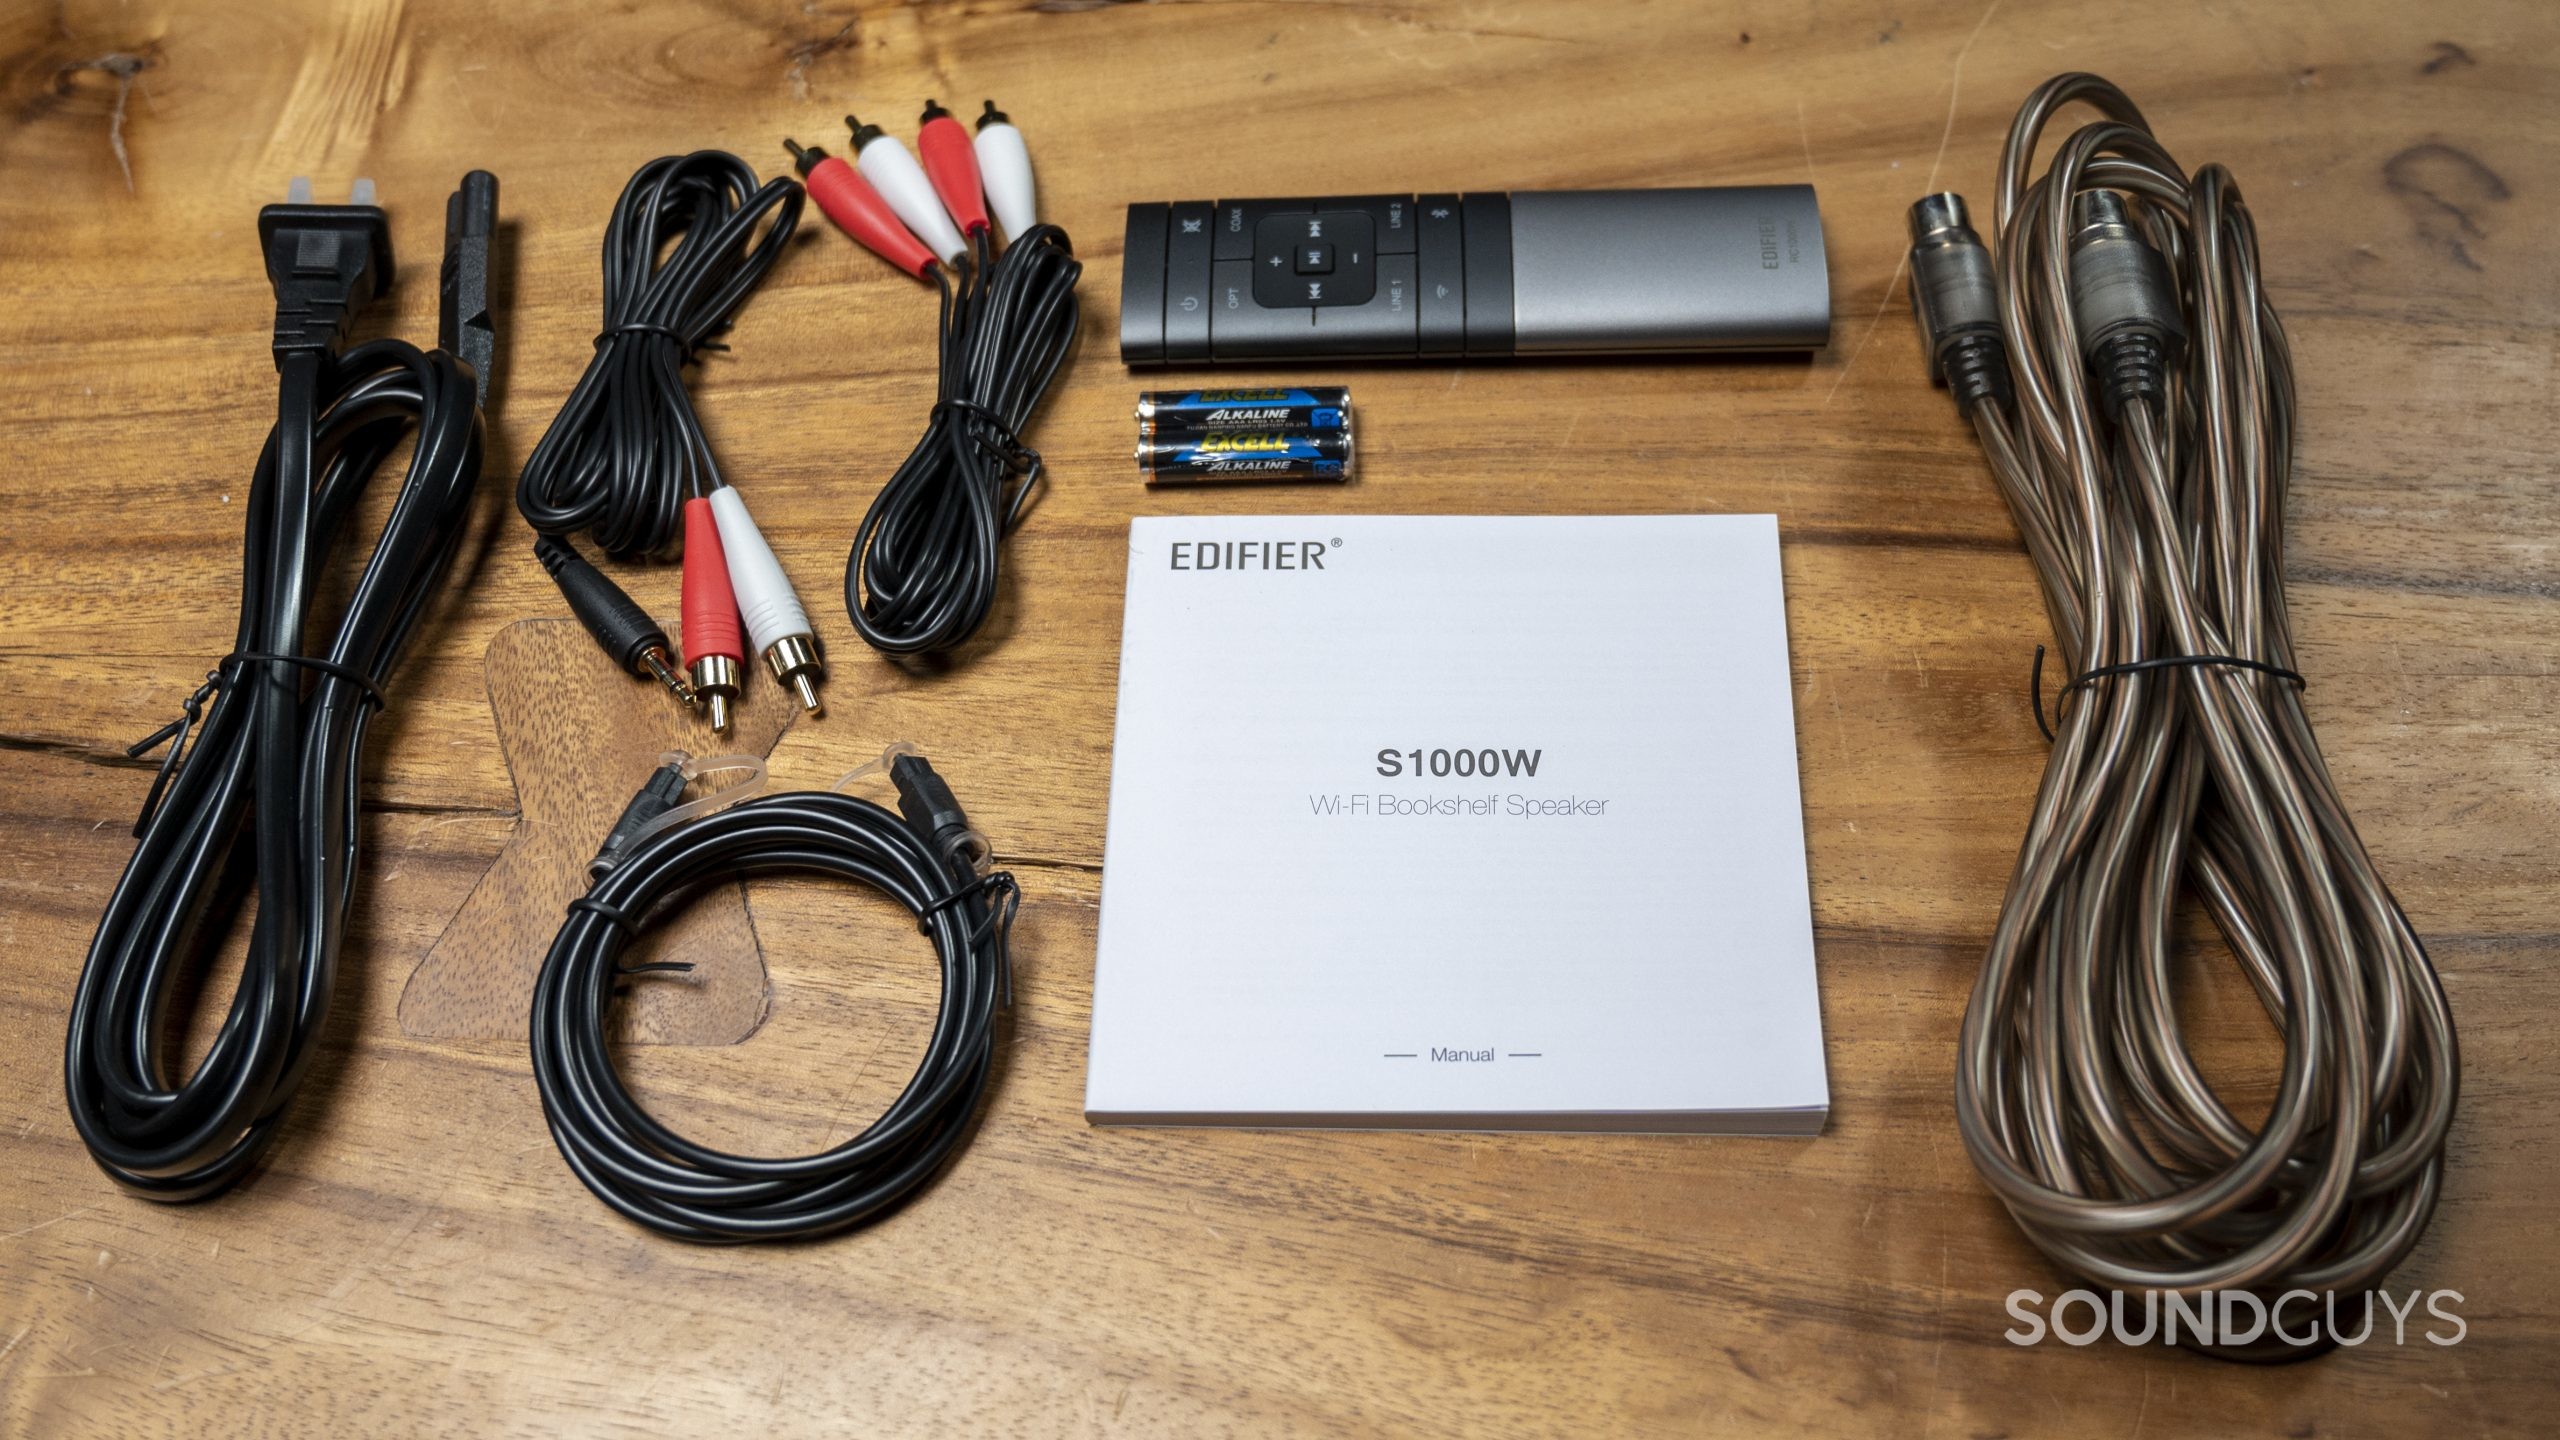 A top down image of the various included cables, remote, and manual for the Edifier S1000W.